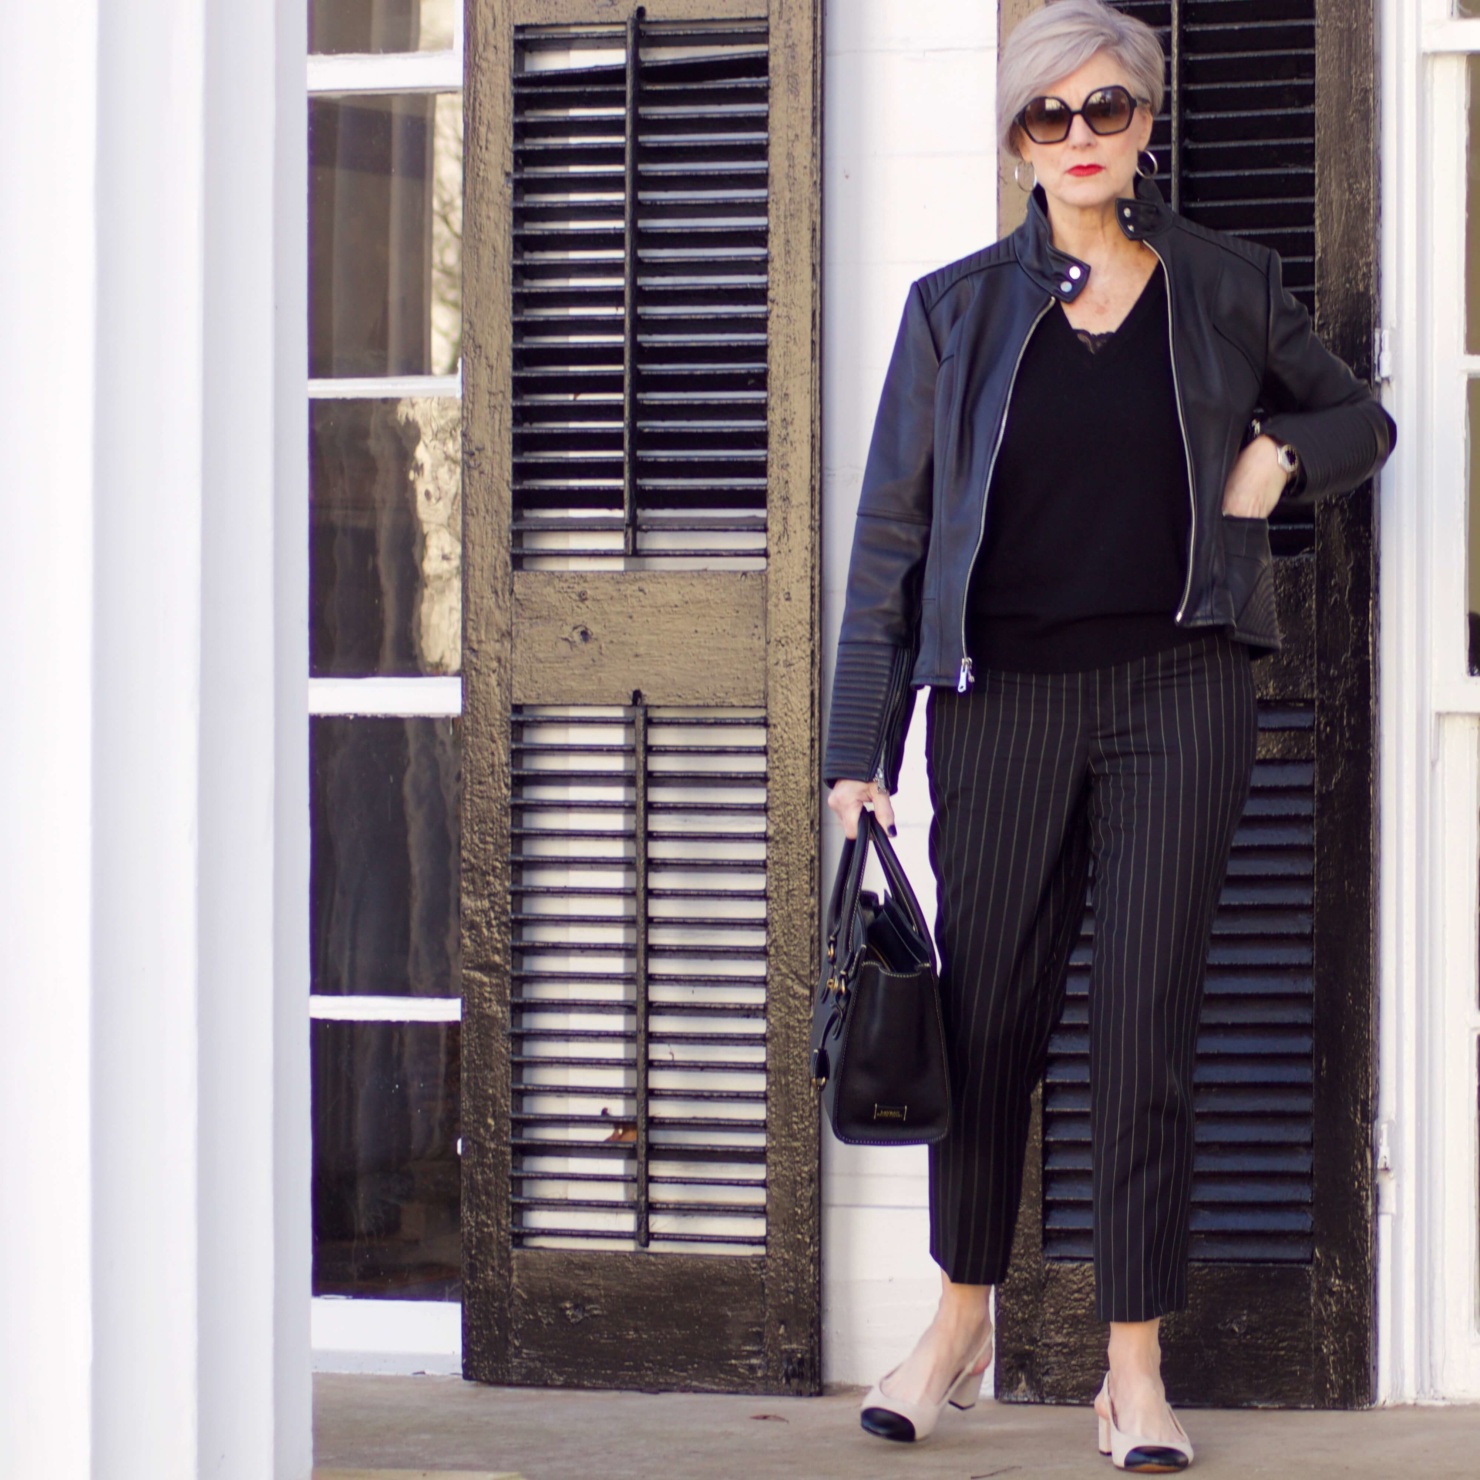 beth from Style at a Certain Age wears Ralph Lauren pinstripe pants, Everlane cashmere sweater, black leather moto jacket, and cap toe slingbacks